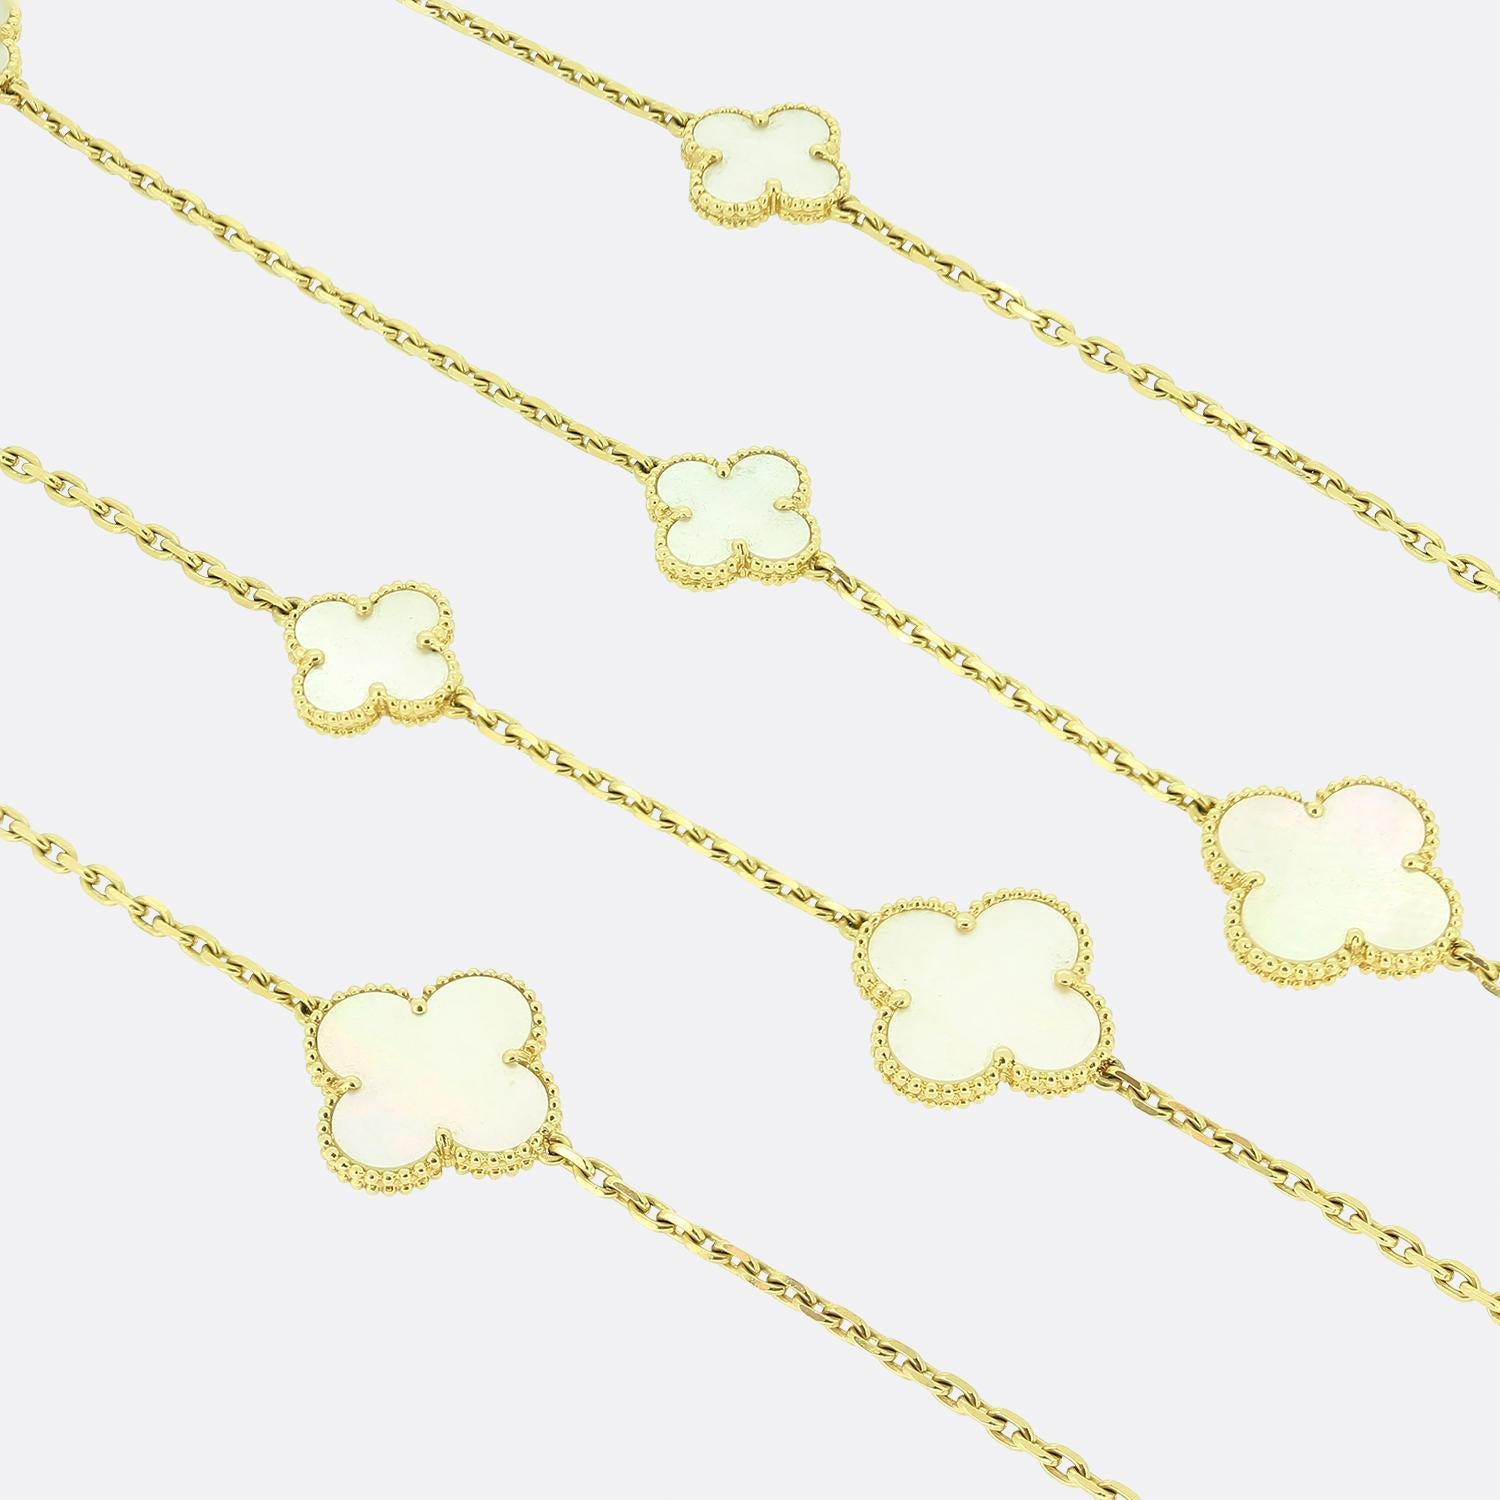 Here we have an 18ct yellow necklace from the vintage Alhambra collection by Van Cleef & Arples. The necklace features 16 of the iconic 4-leaf clover motifs, each set with a beaded edge and mother-of-pearl inlay. 

Condition: Used (Very